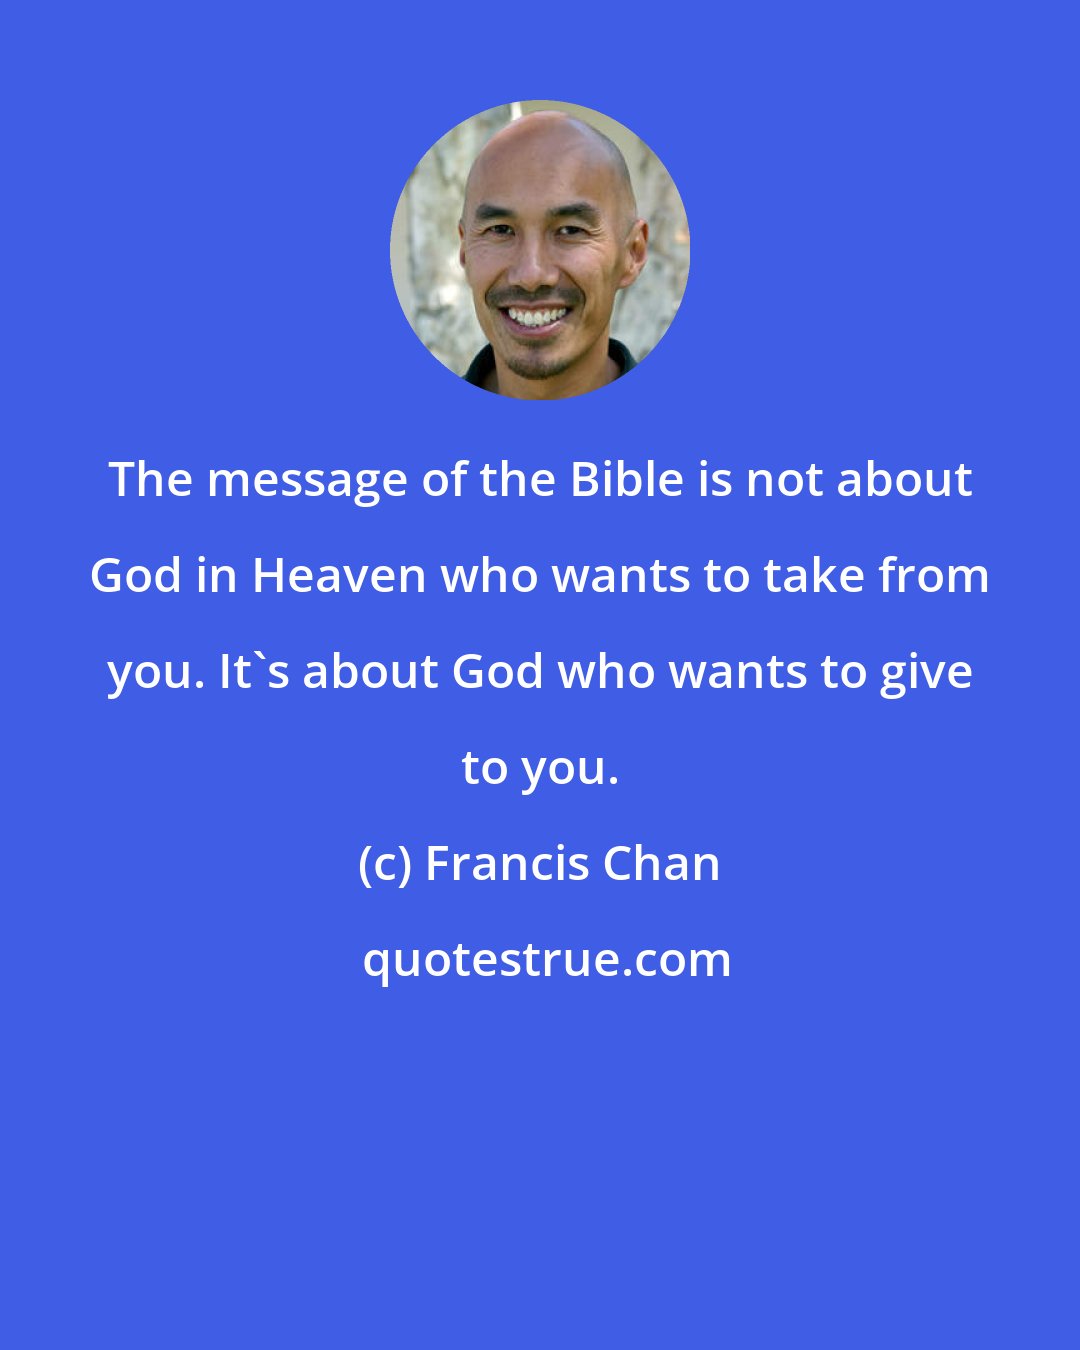 Francis Chan: The message of the Bible is not about God in Heaven who wants to take from you. It's about God who wants to give to you.